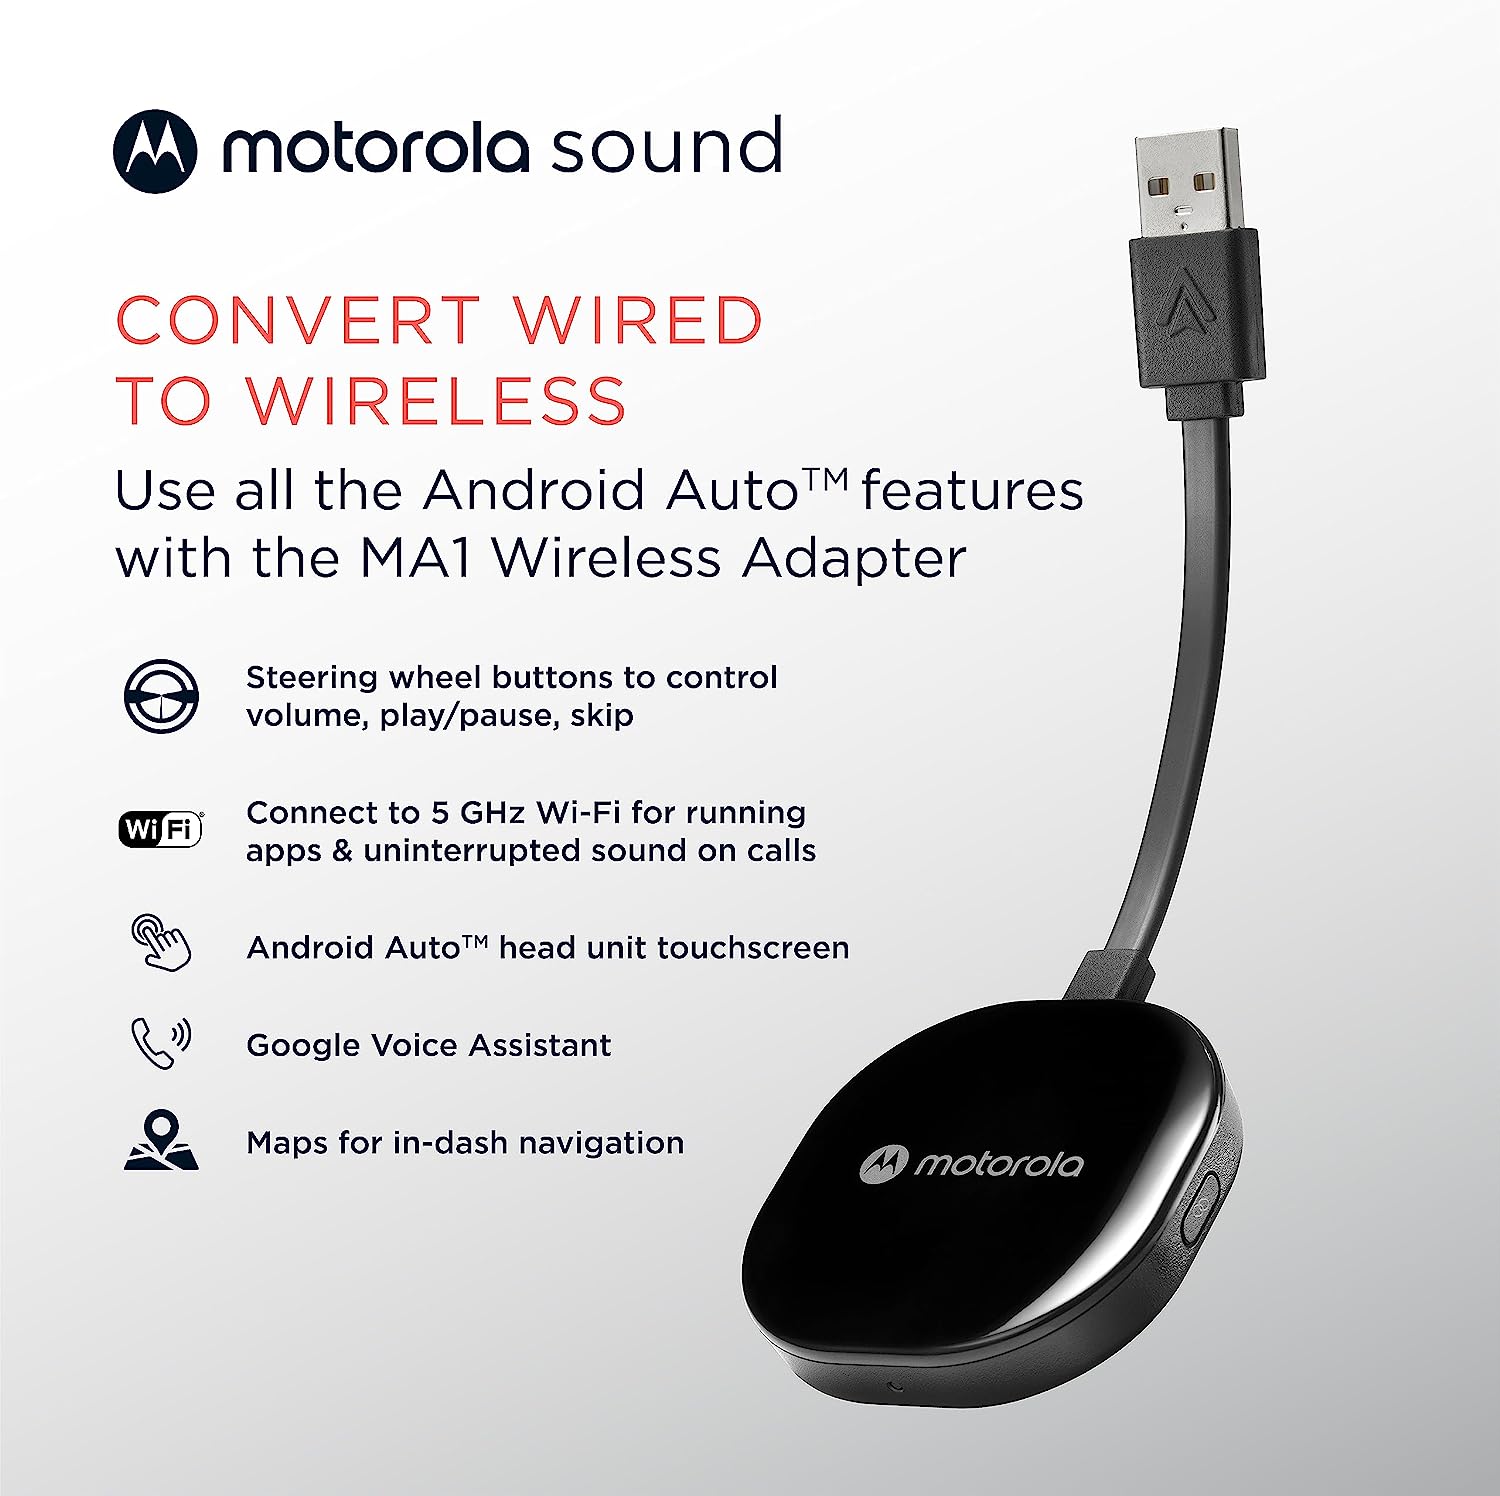 Android Auto Wireless Adapter for Car, Wireless Android Auto Dongle  Converts Wired Android Auto to Wireless Adapter 5Ghz WiFi Auto-Connect,  Android